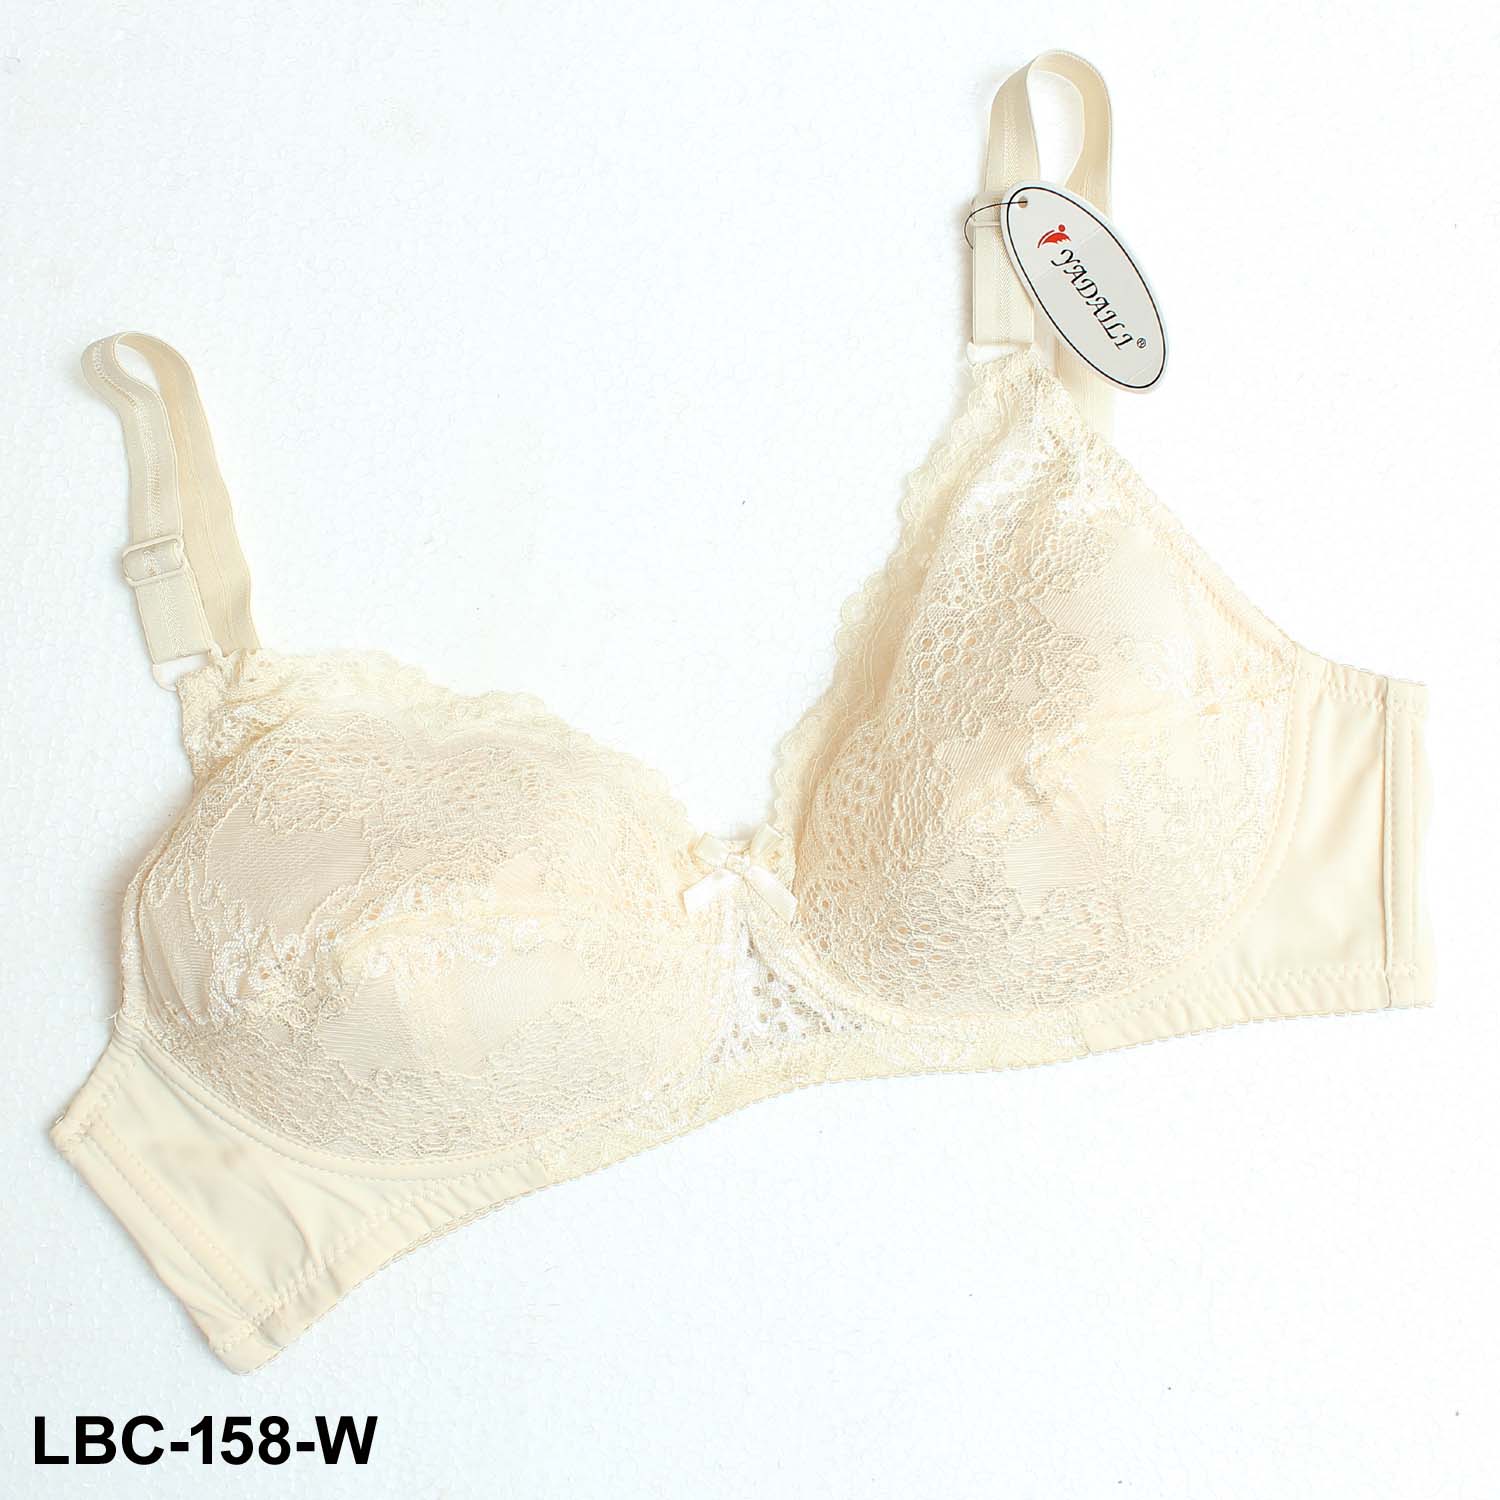 White Net padded Bra Double Strap Lace Net Bra soft padded for Girl's and  Woman's Fashion-White, Sale Price in Pakistan